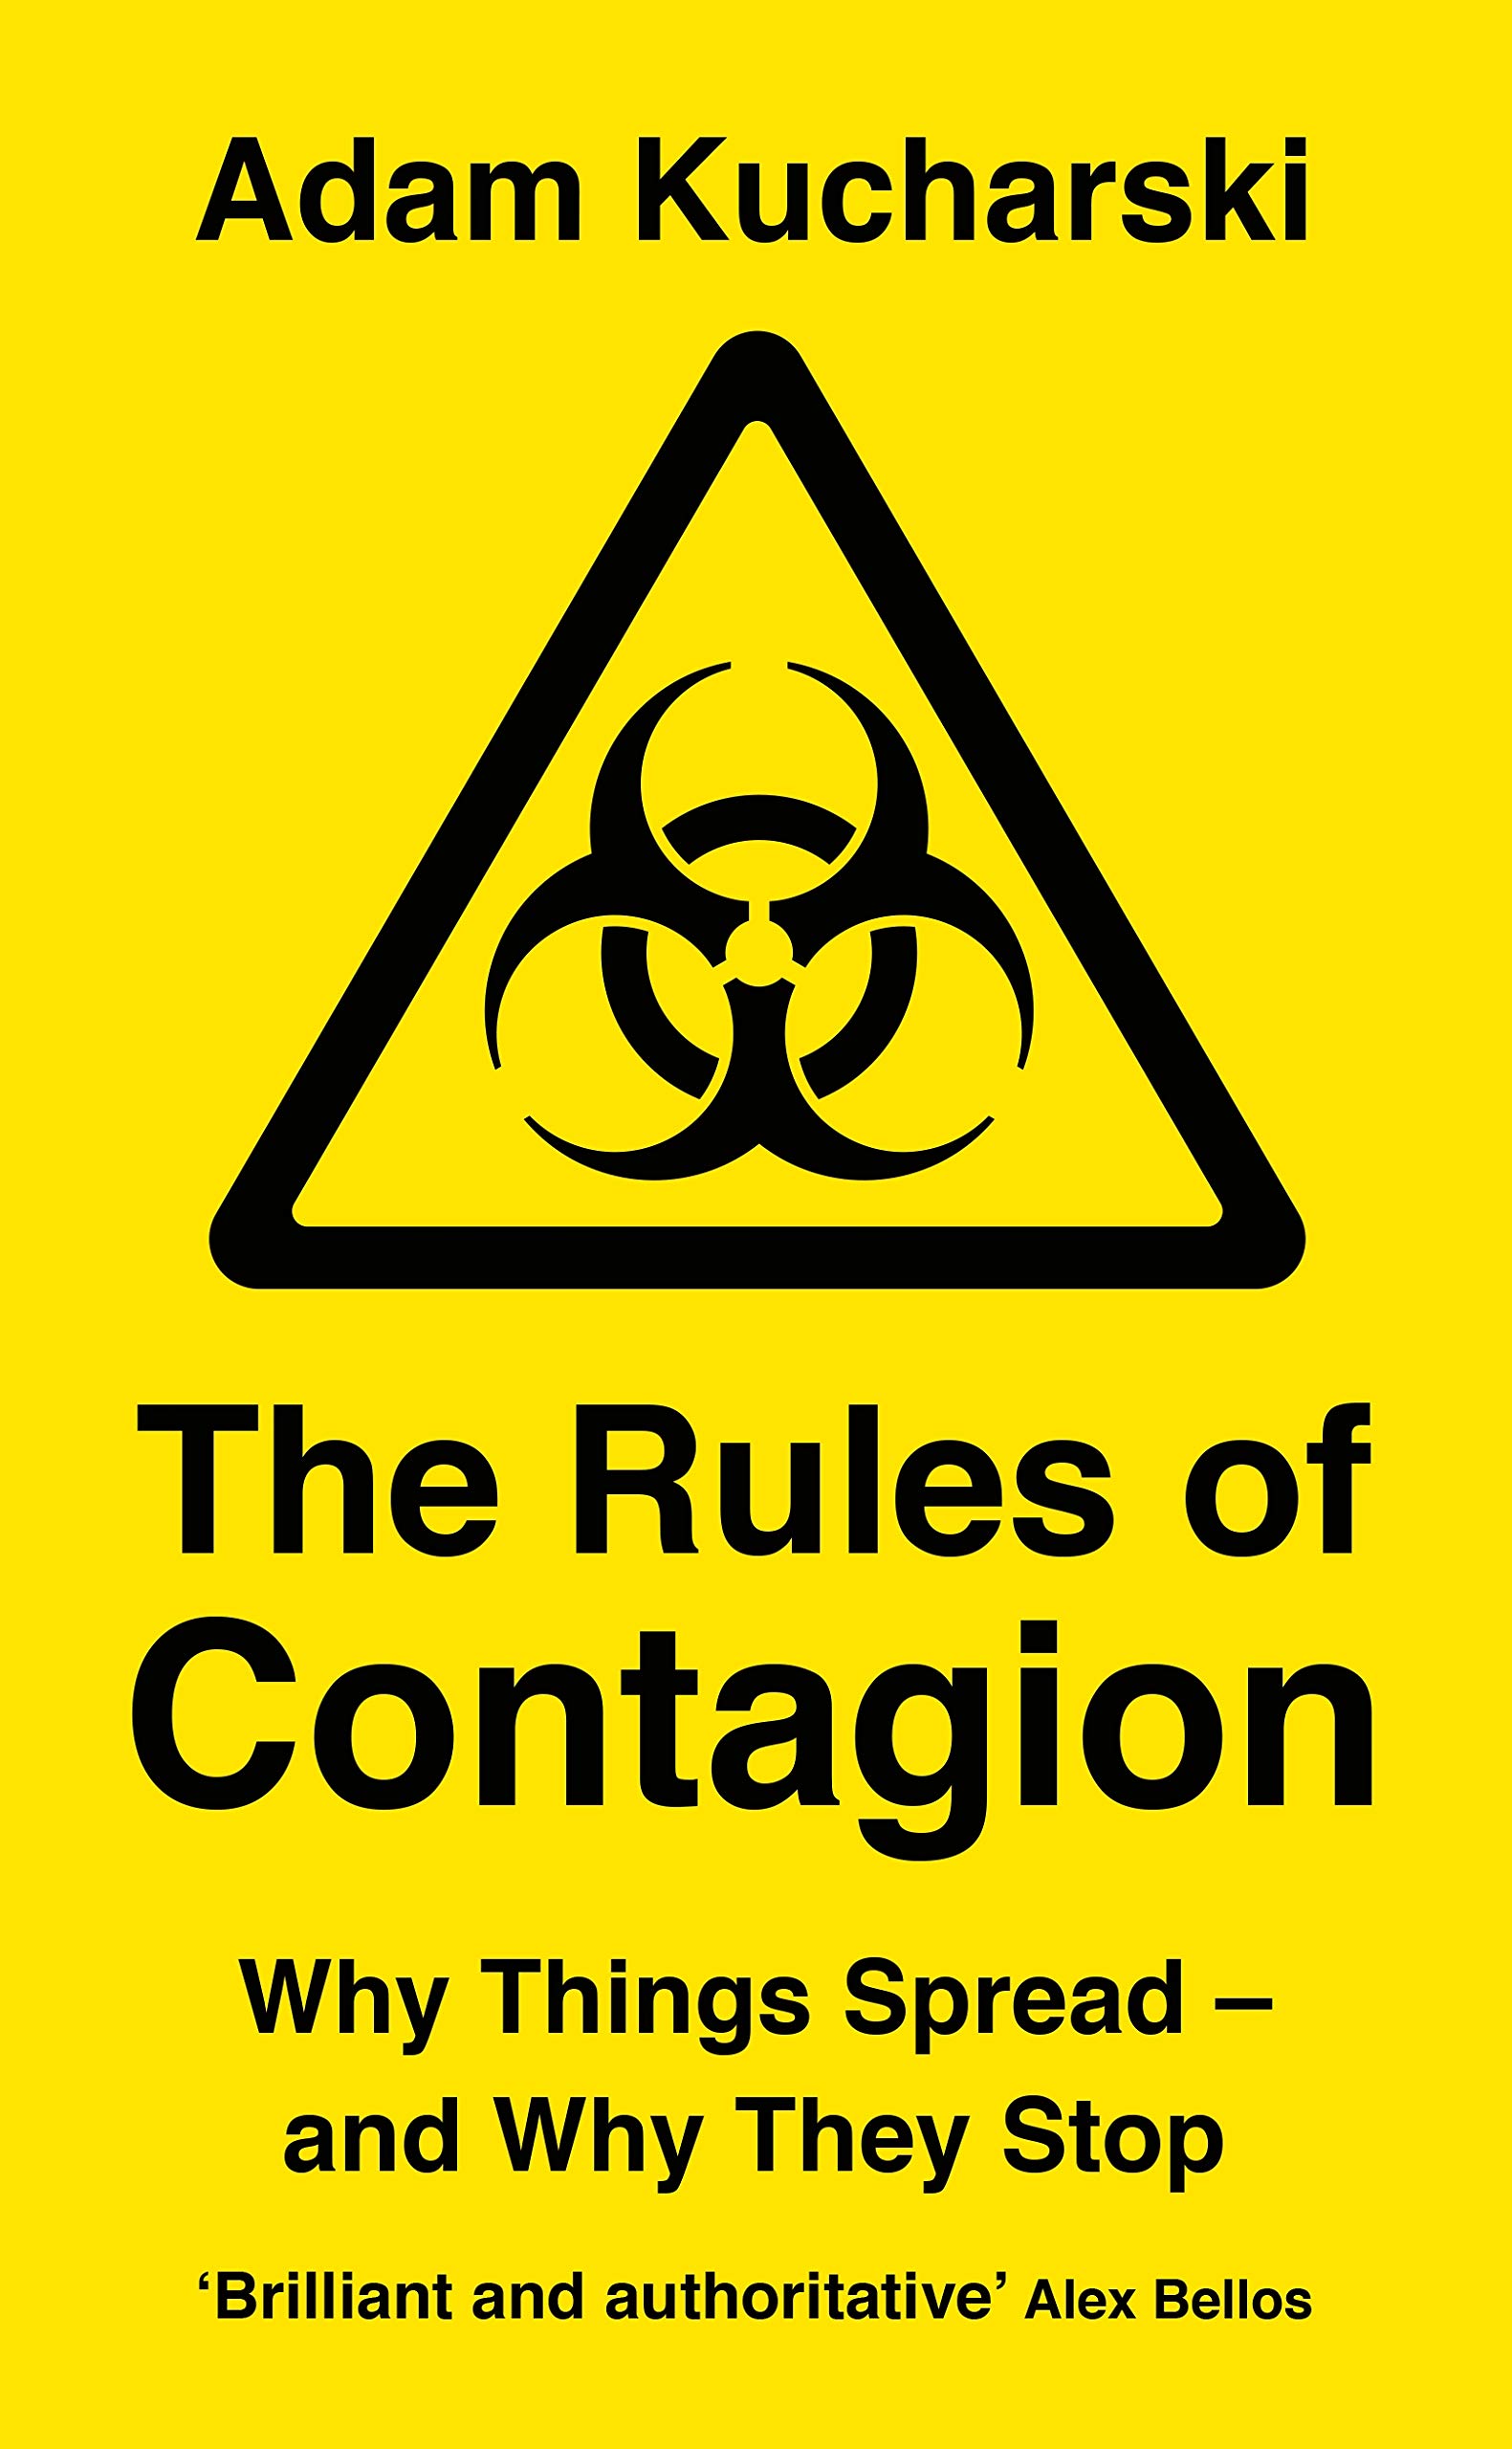 The Rules of Contagion: Why Things Spread - and Why They Stop, by Adam Kucharski - Survival (and Other) Books About the COVID-19 Coronavirus - Survival Books - Survival, Sustainable Living